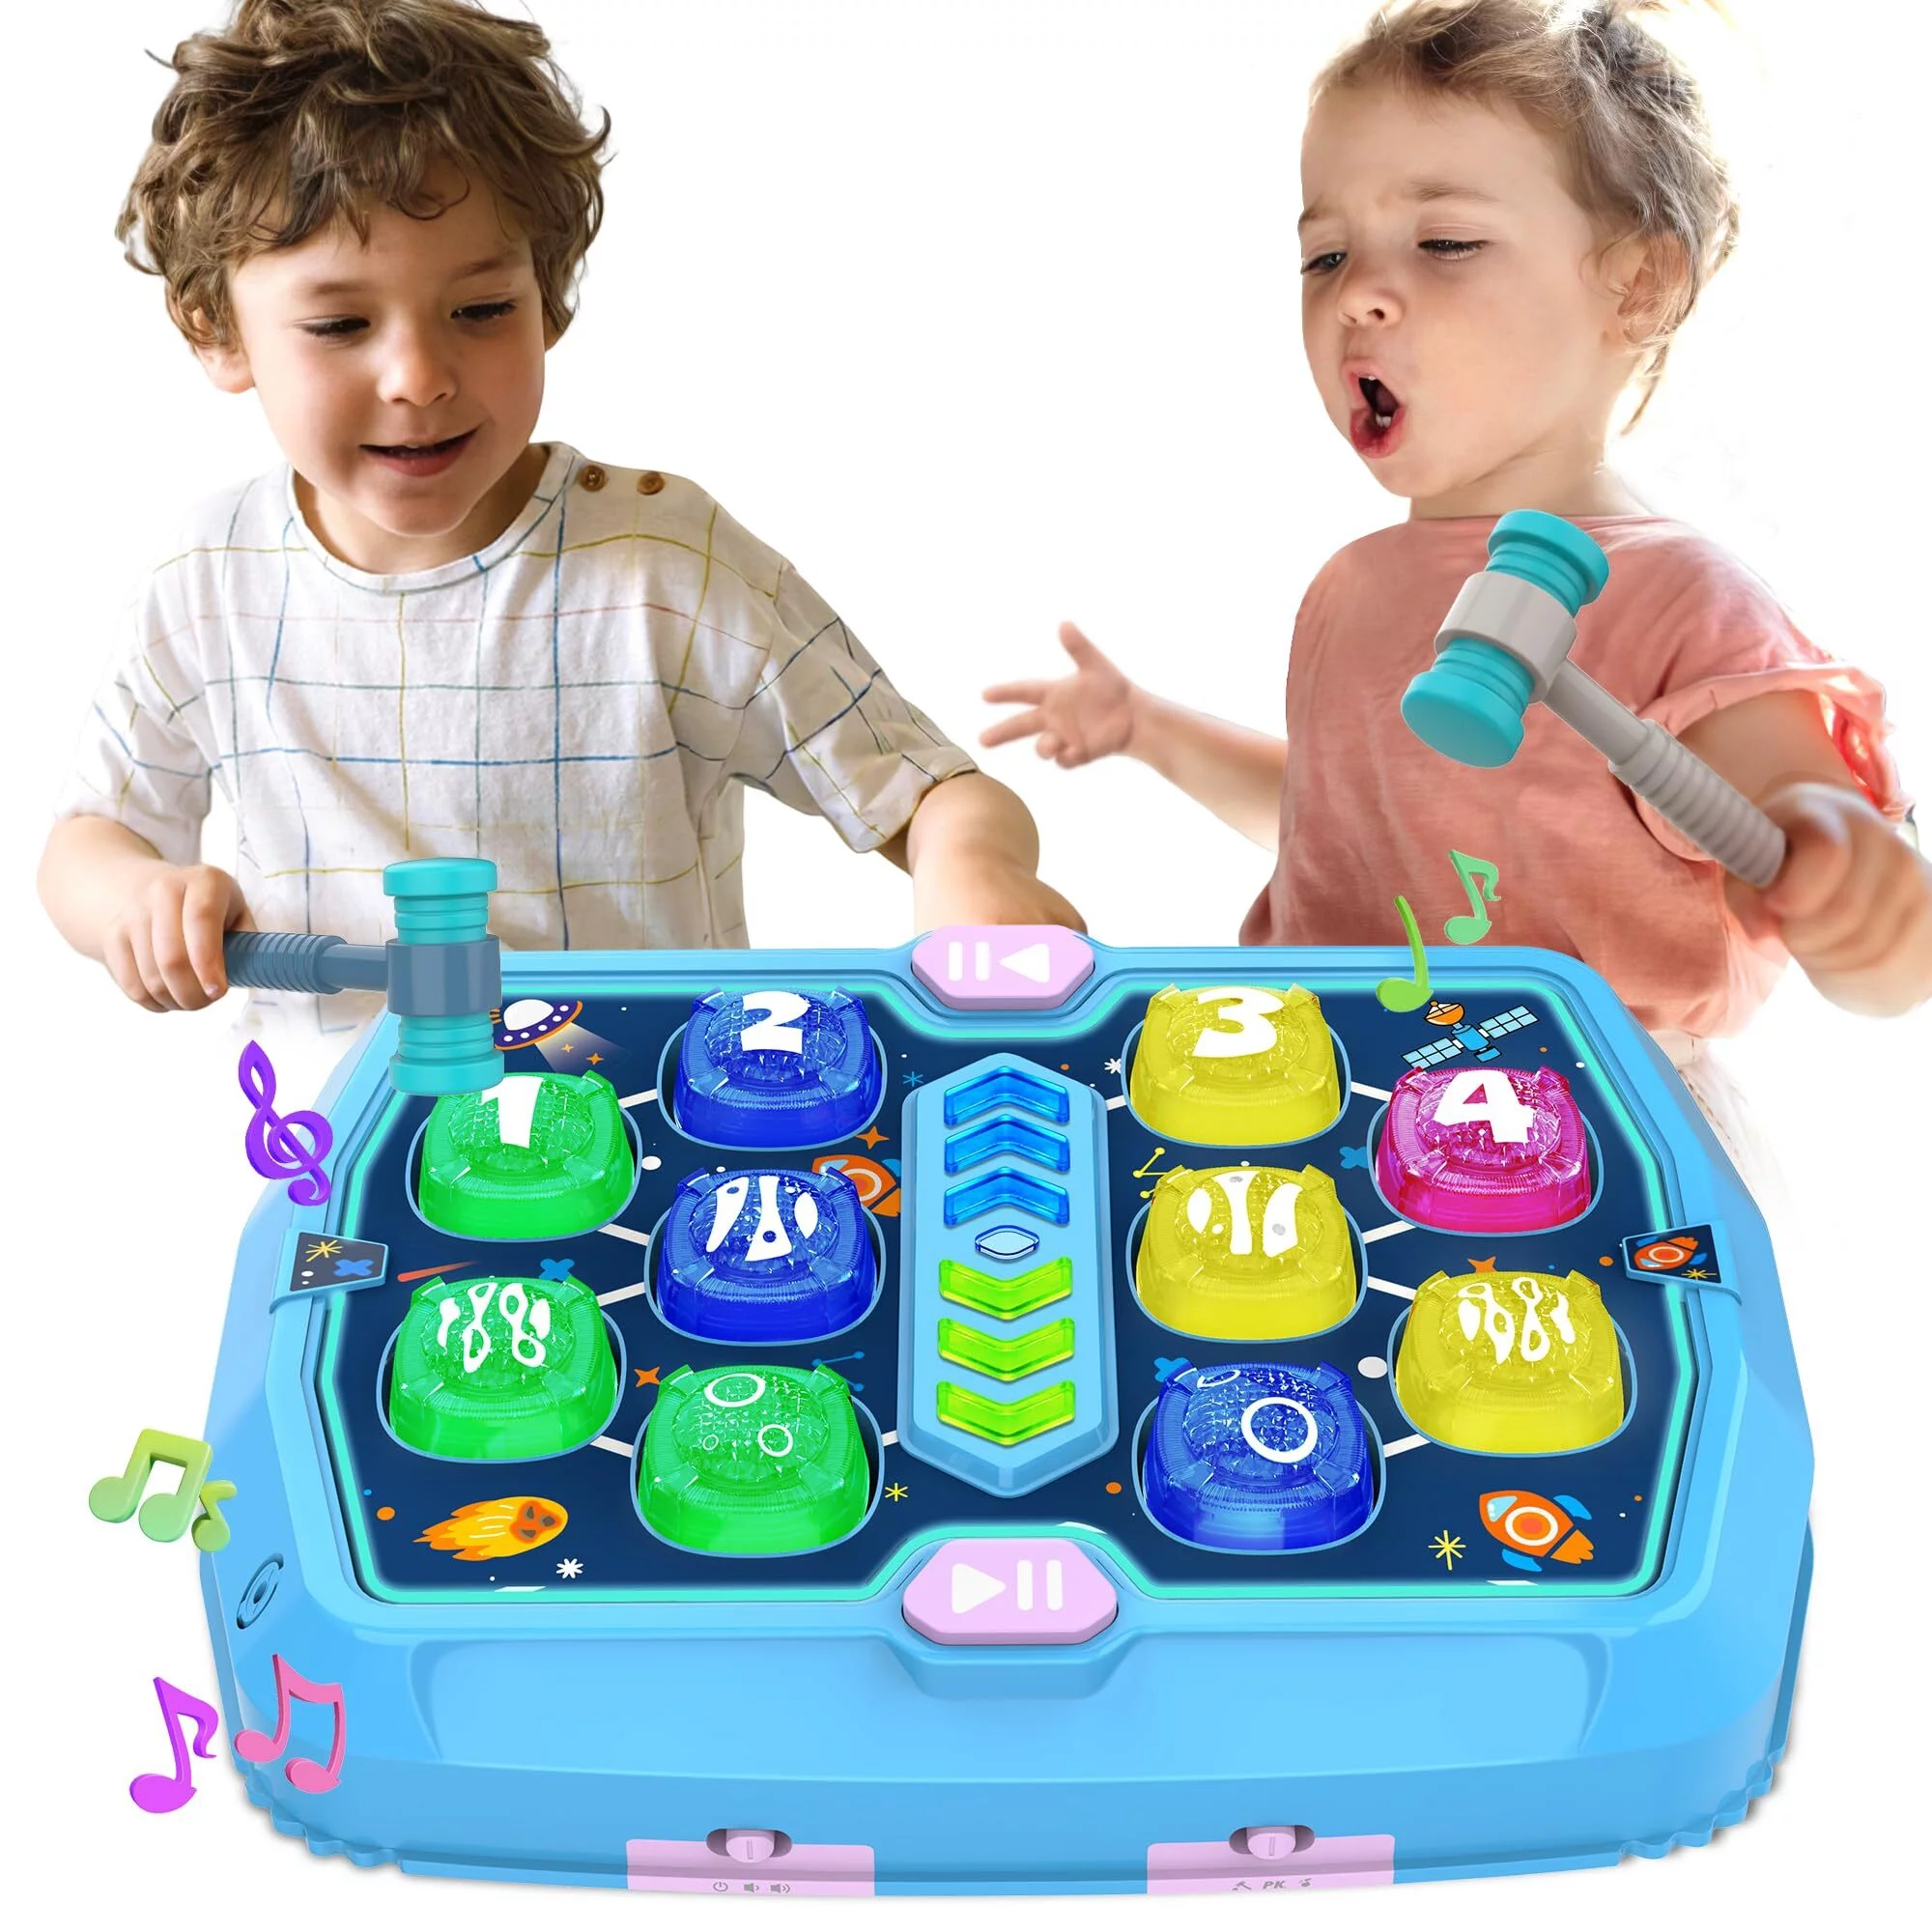 ANNKIE Interactive Whack a Mole Game for Toddlers - Early Learning Toy with 2 Soft Hammers,Blue